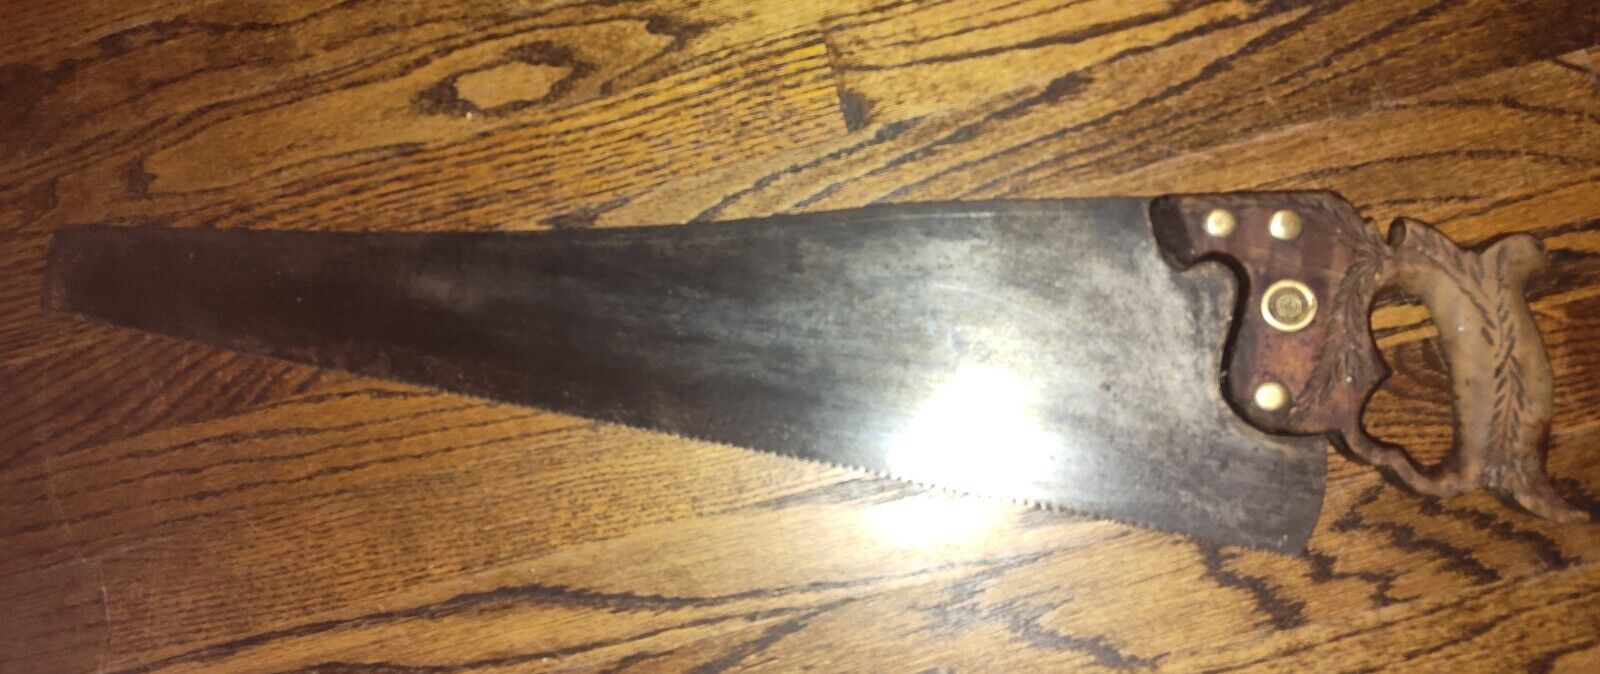 RARE Early Antique Disston Handsaw Wood Handle Vintage